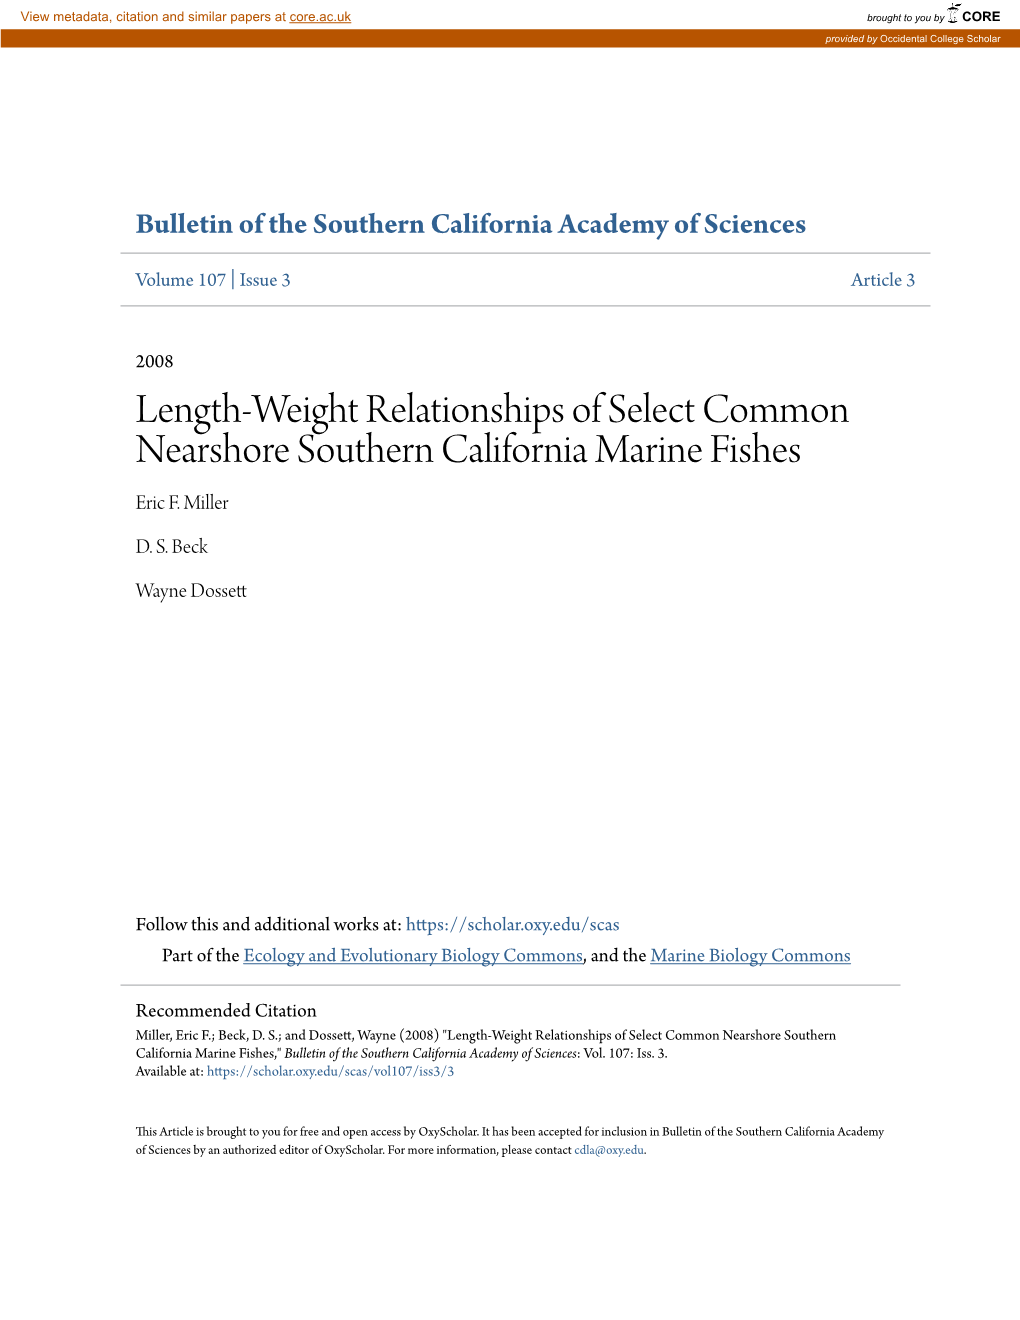 Length-Weight Relationships of Select Common Nearshore Southern California Marine Fishes Eric F